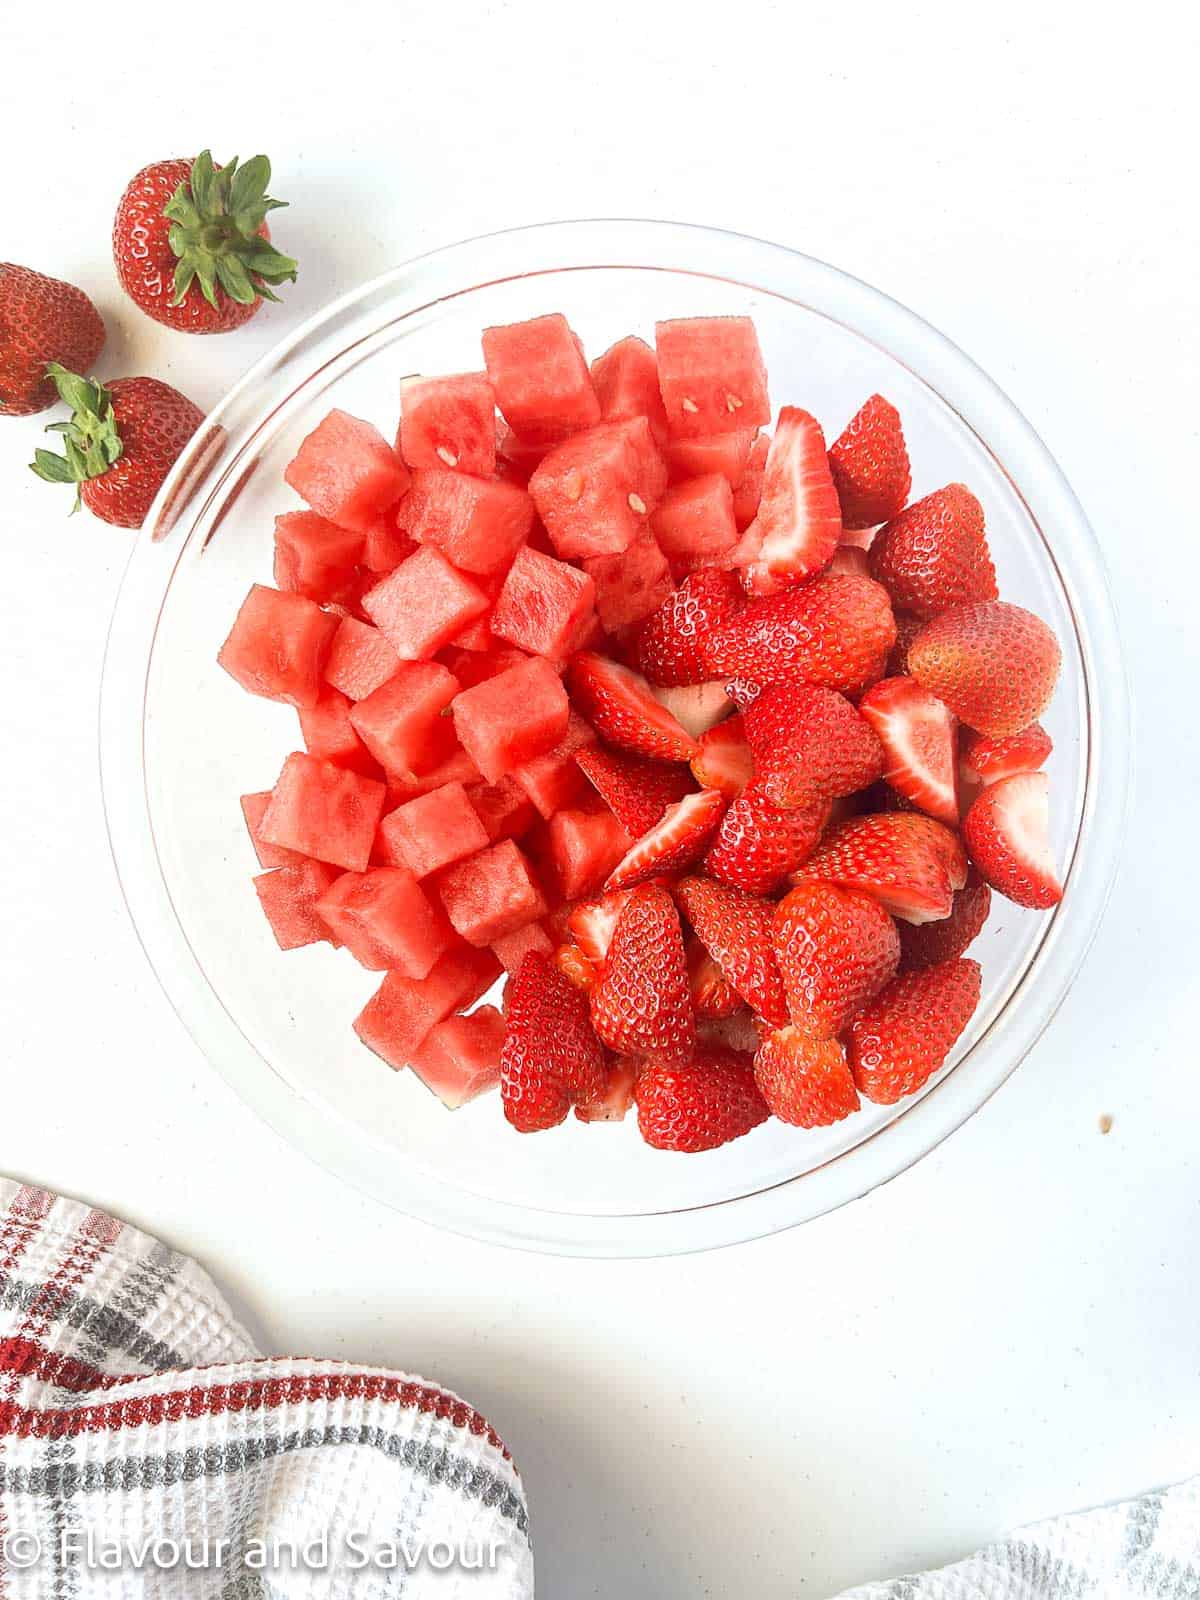 A bowl of cubed watermelon and sliced strawberries.